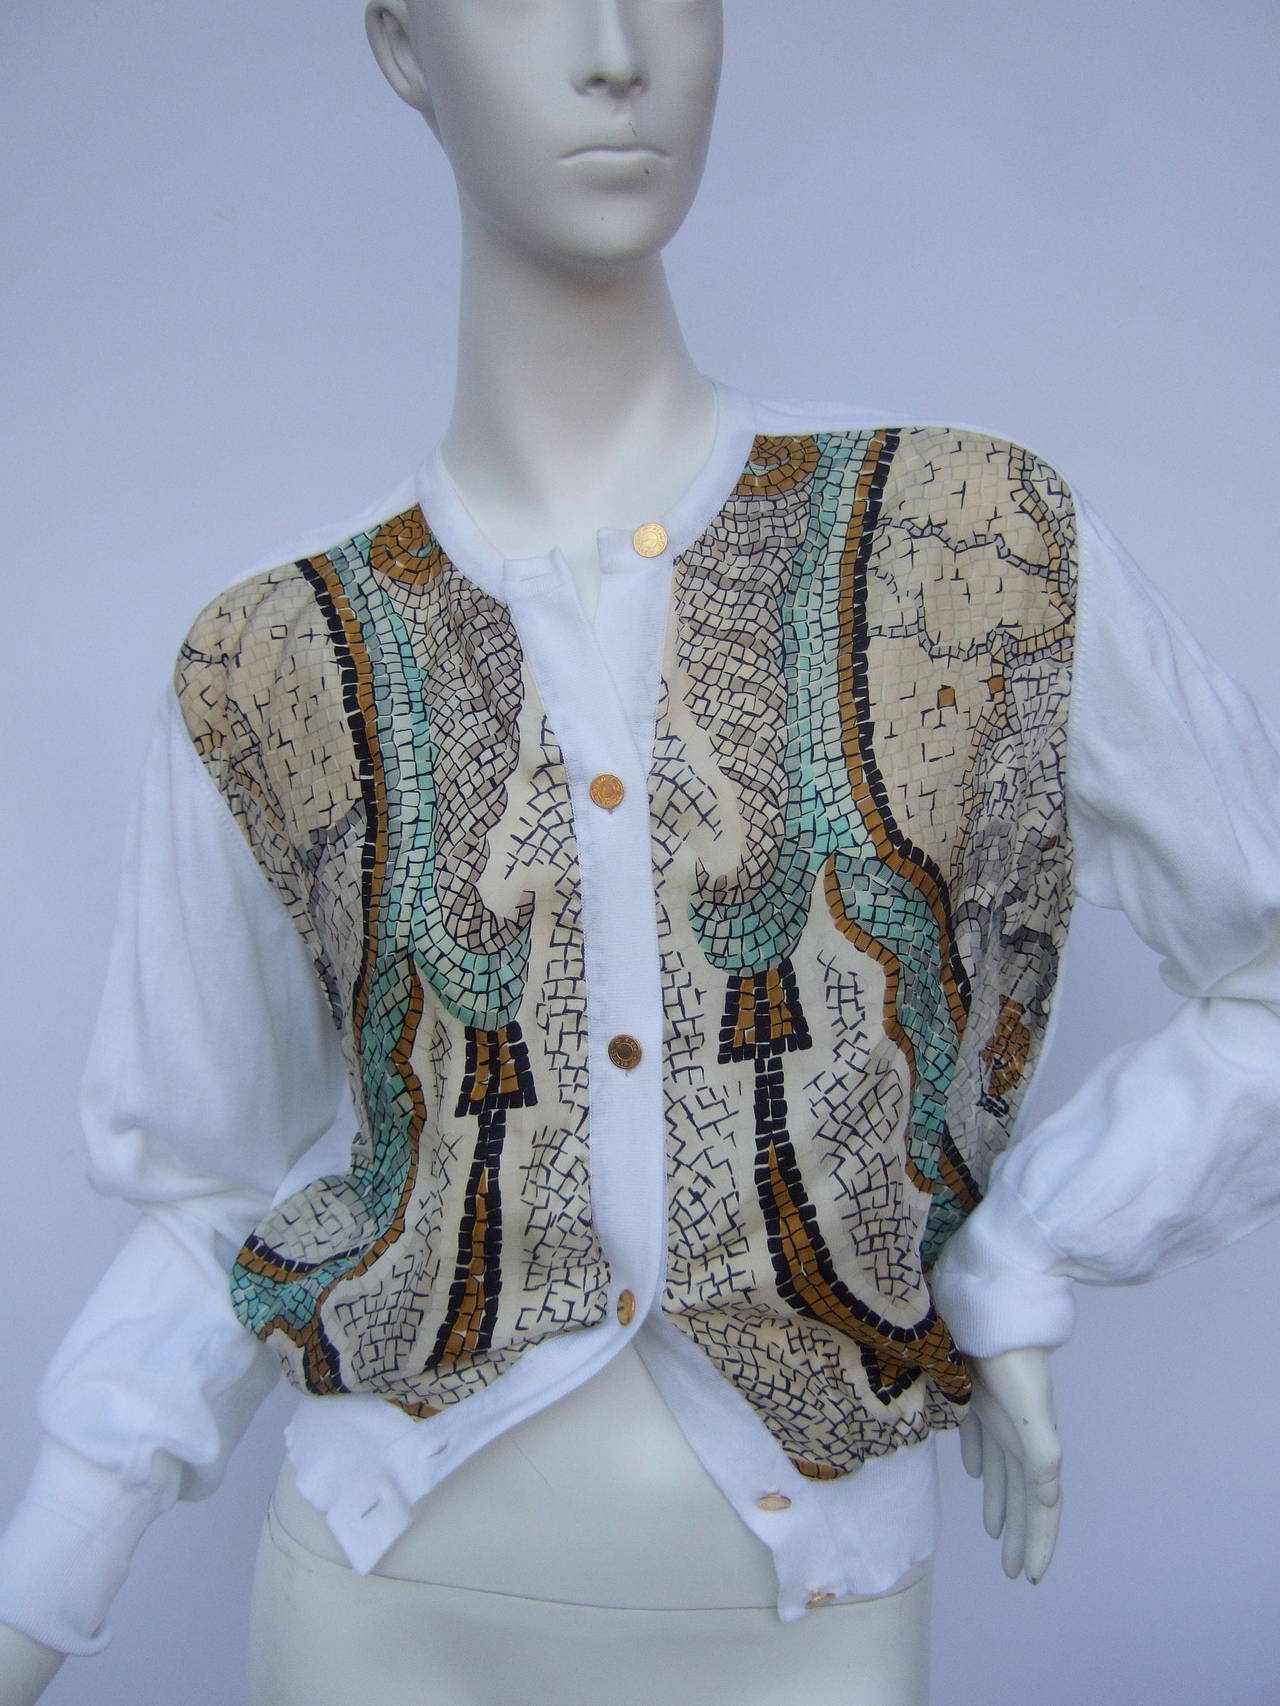 Hermes Paris Silk & cotton gilt button cardigan Size 42
The elegant cardigan is designed with silk print panels on the front
The stylish cardigan is embellished with six gilt metal Hermes buttons running down the front. An extra gilt metal